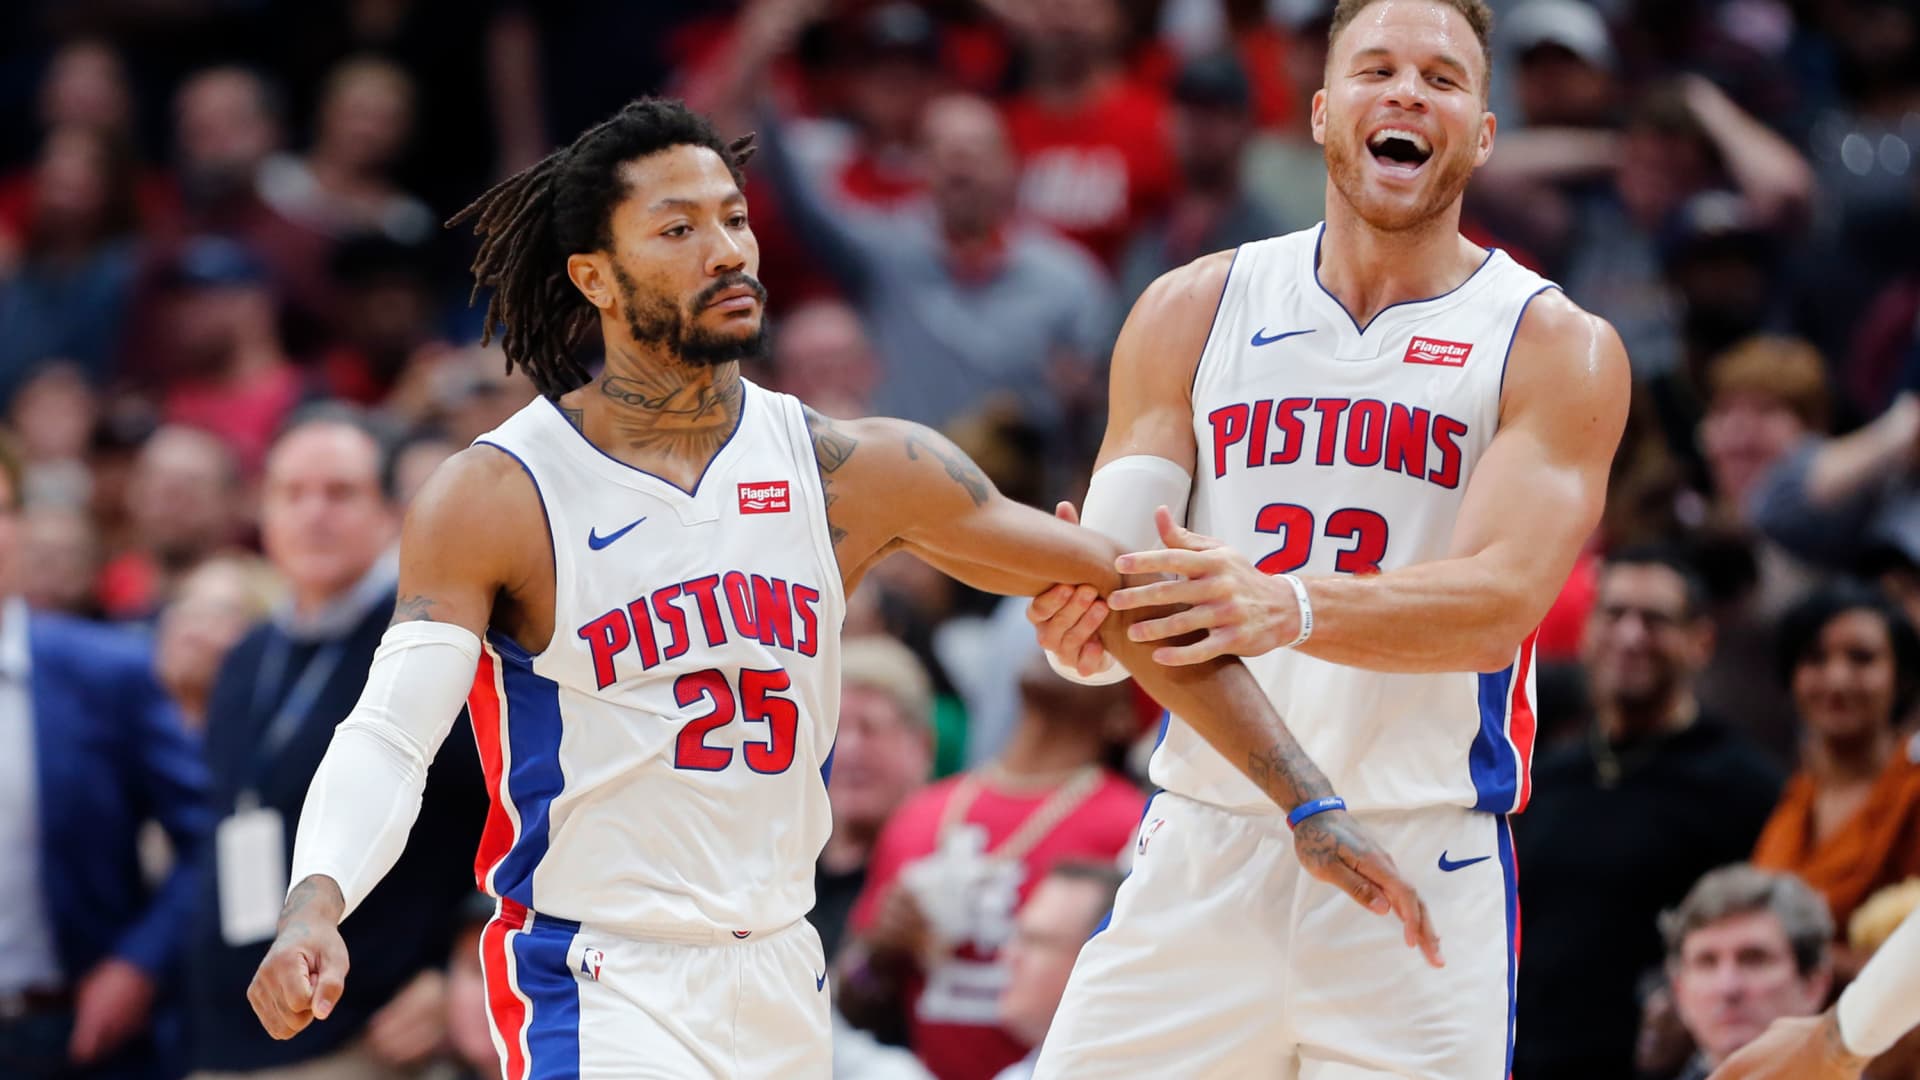 Detroit Pistons guard Derrick Rose (25) celebrates the game winning score with forward Blake Griffin (23) in the second half of an NBA basketball game in New Orleans, Monday, Dec. 9, 2019.